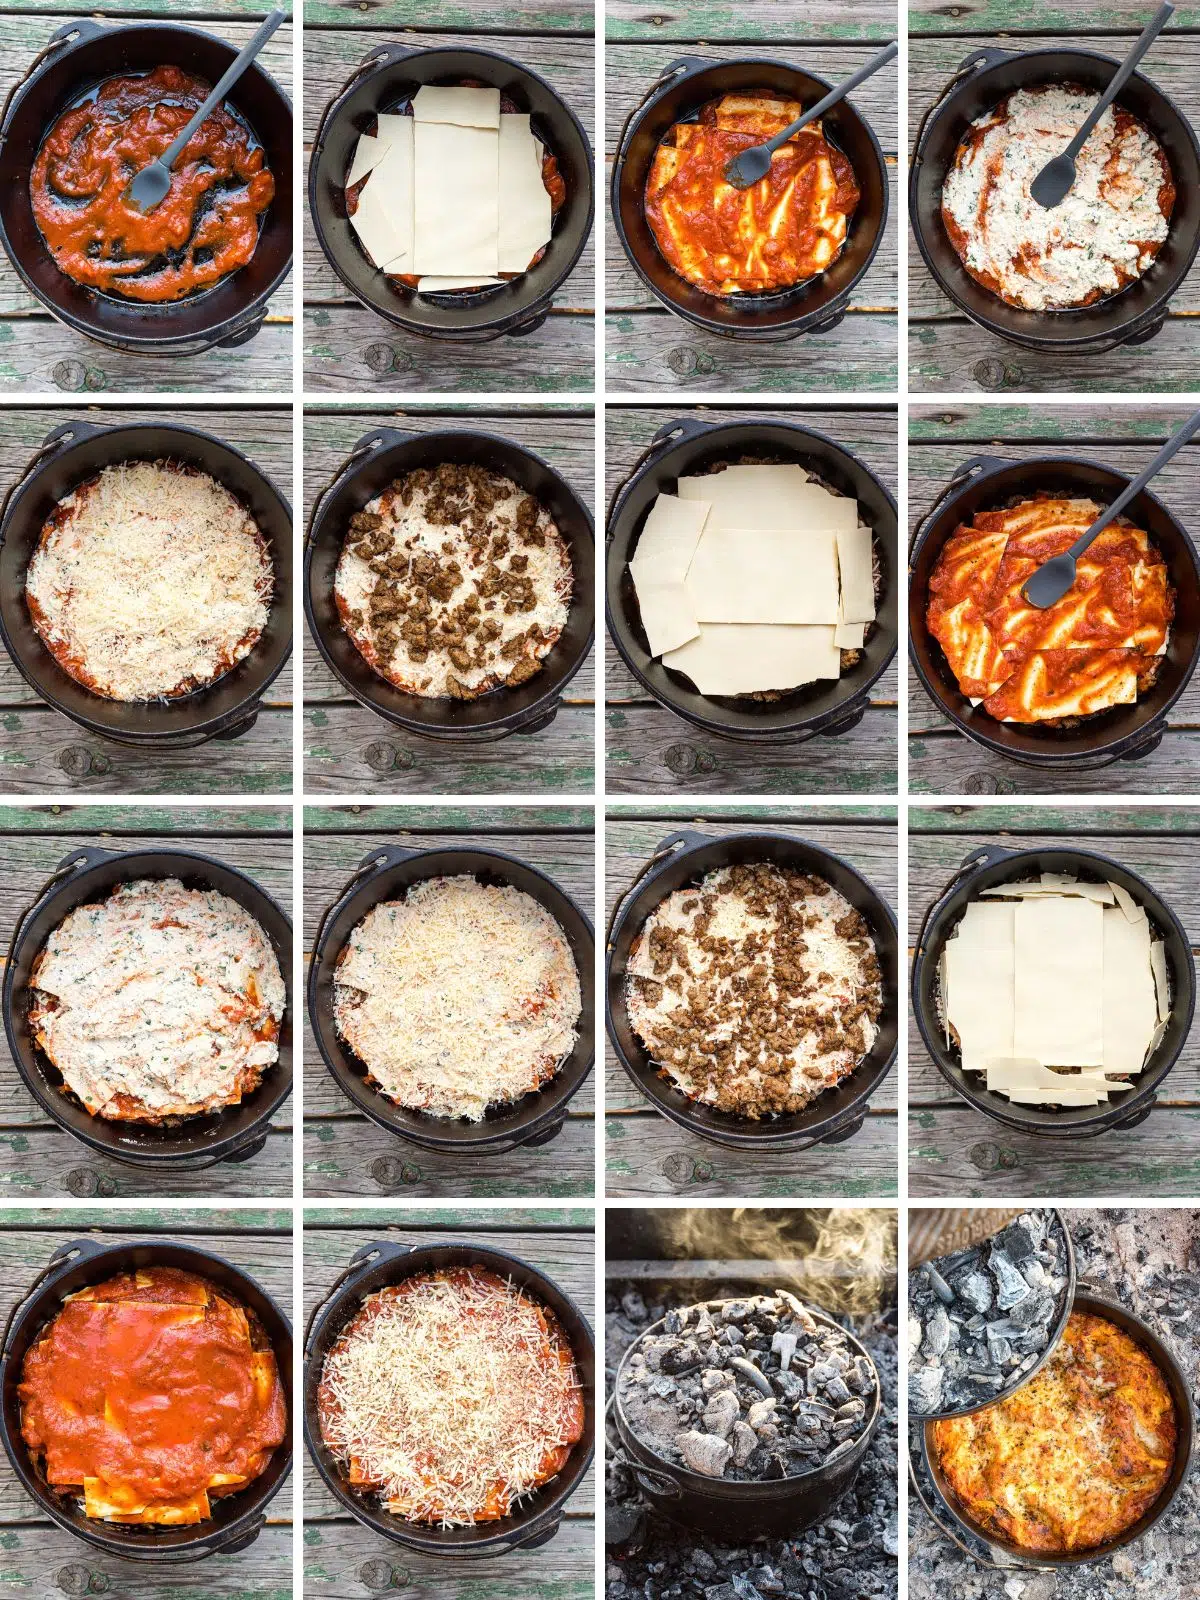 Steps to layer ingredients into the Dutch oven.